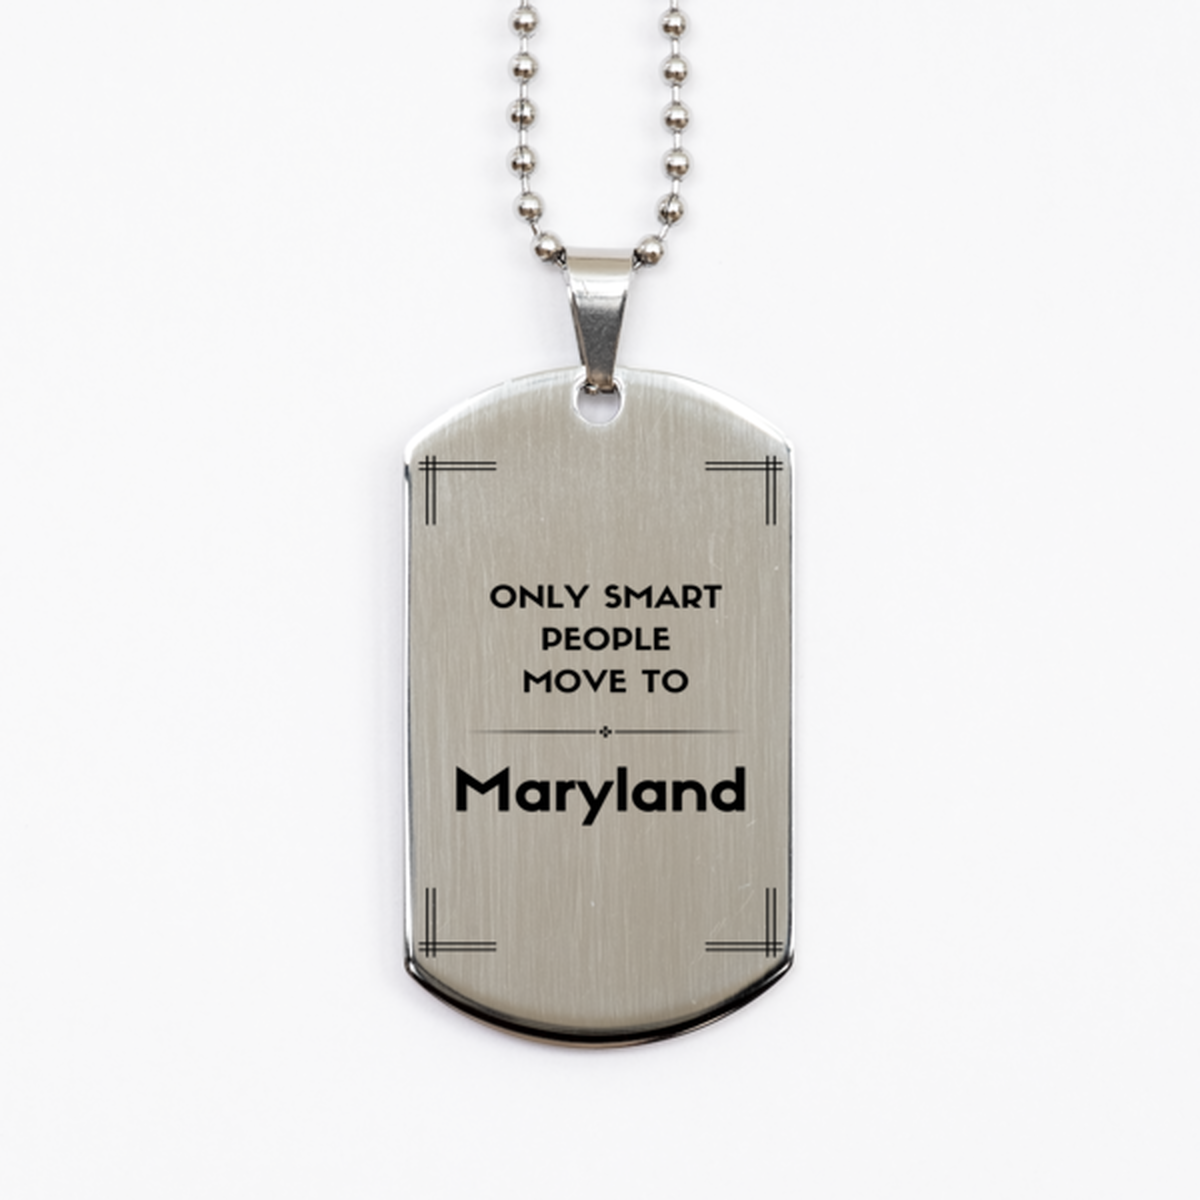 Only smart people move to Maryland Silver Dog Tag, Gag Gifts For Maryland, Move to Maryland Gifts for Friends Coworker Funny Saying Quote